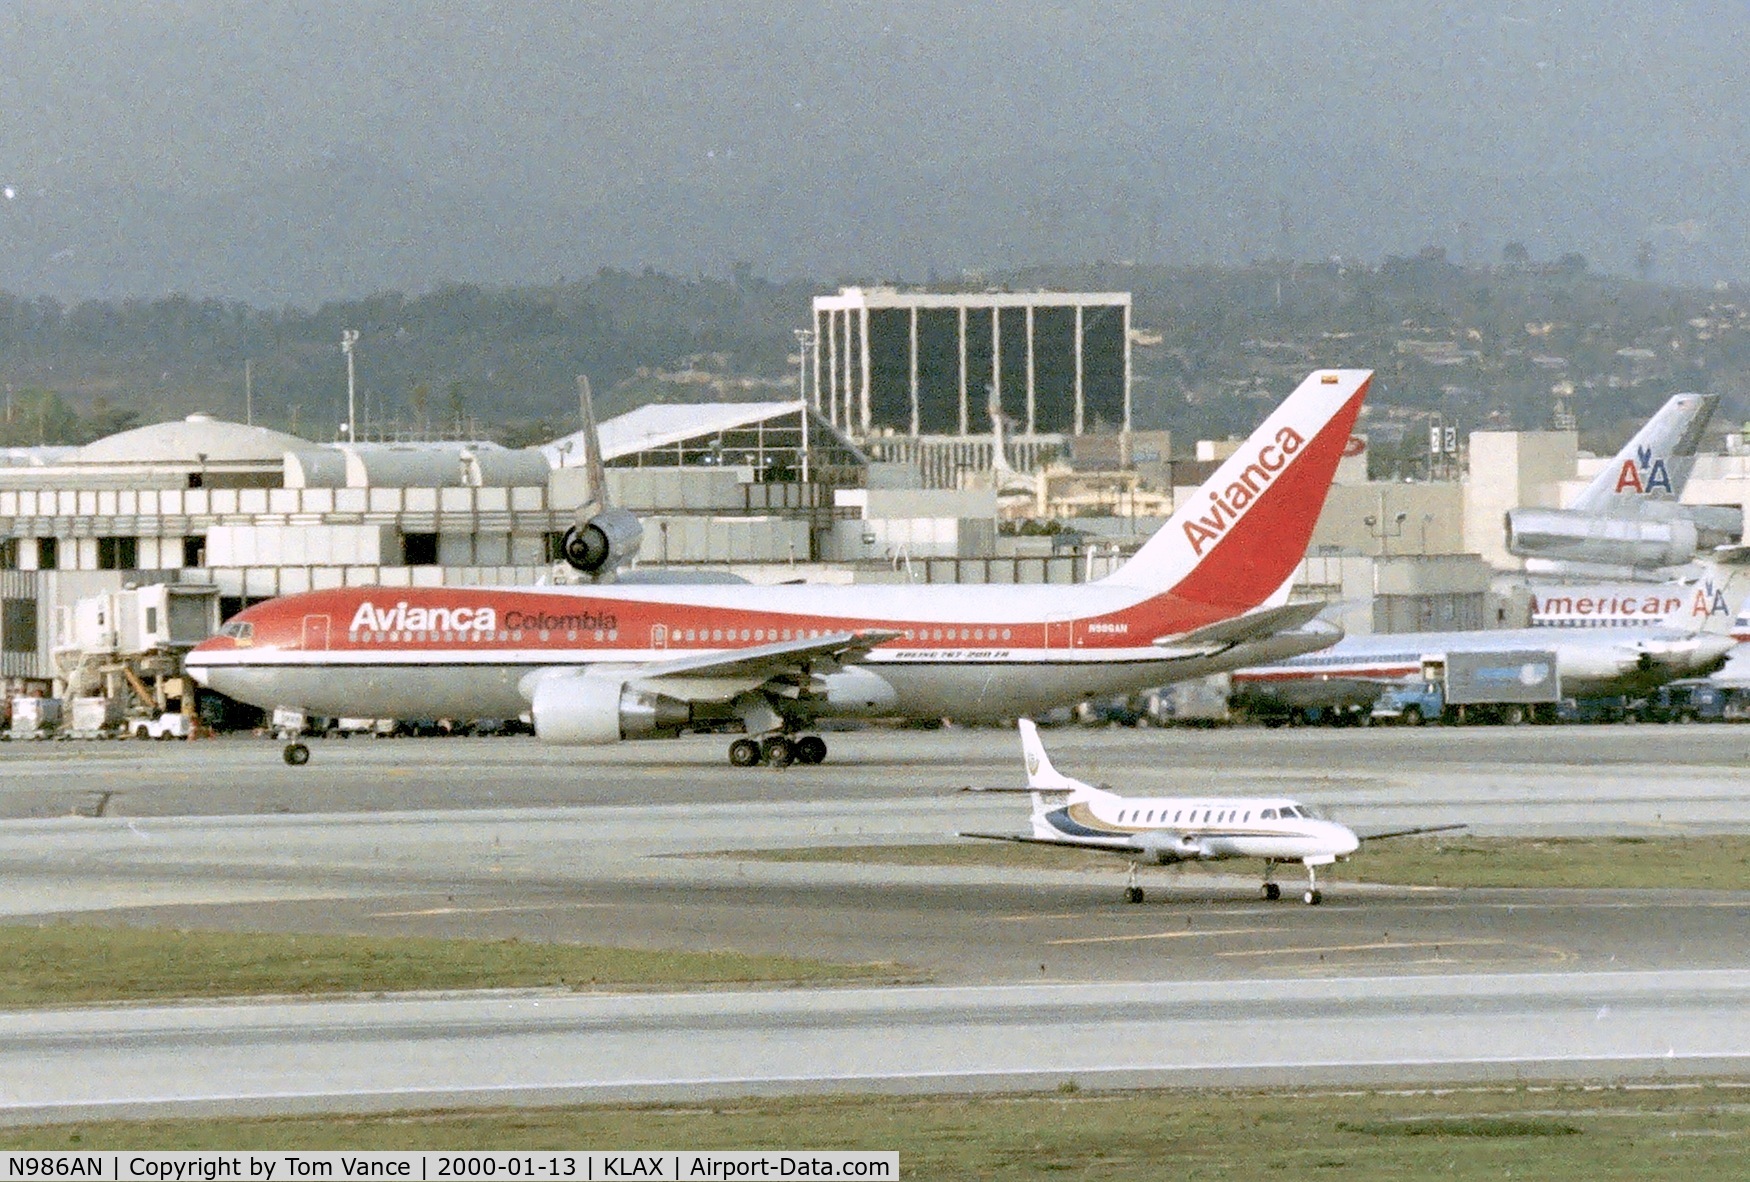 N986AN, 1990 Boeing 767-259 C/N 24835, 767-200ER rolling off 25L at LAX